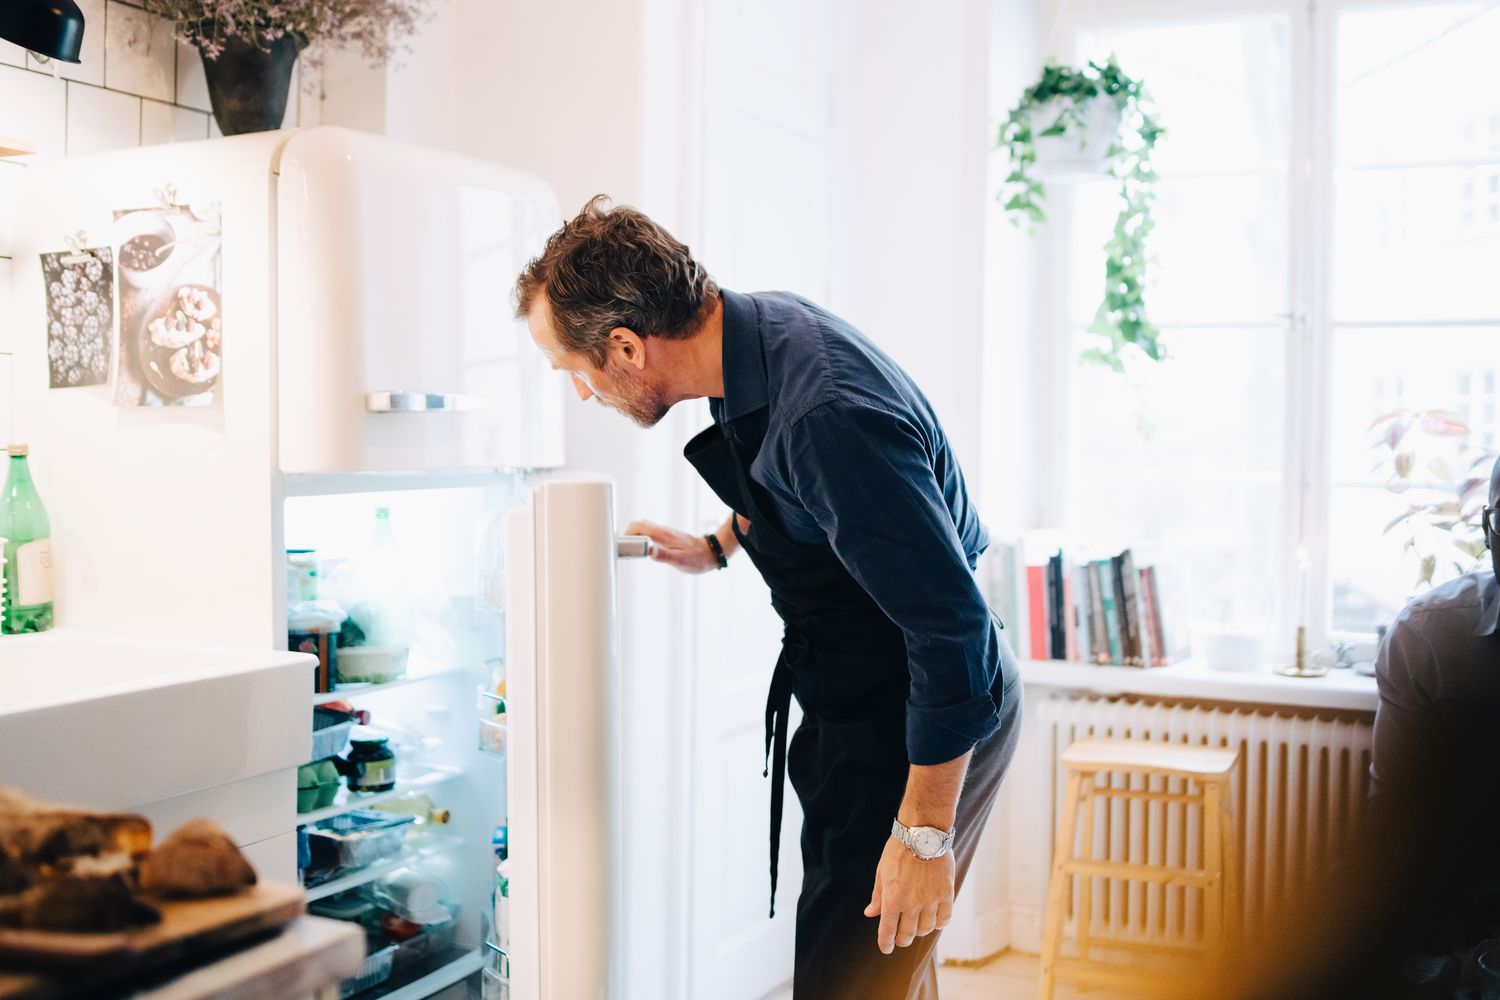 Man looking into refrigerator while standing at kitchen.